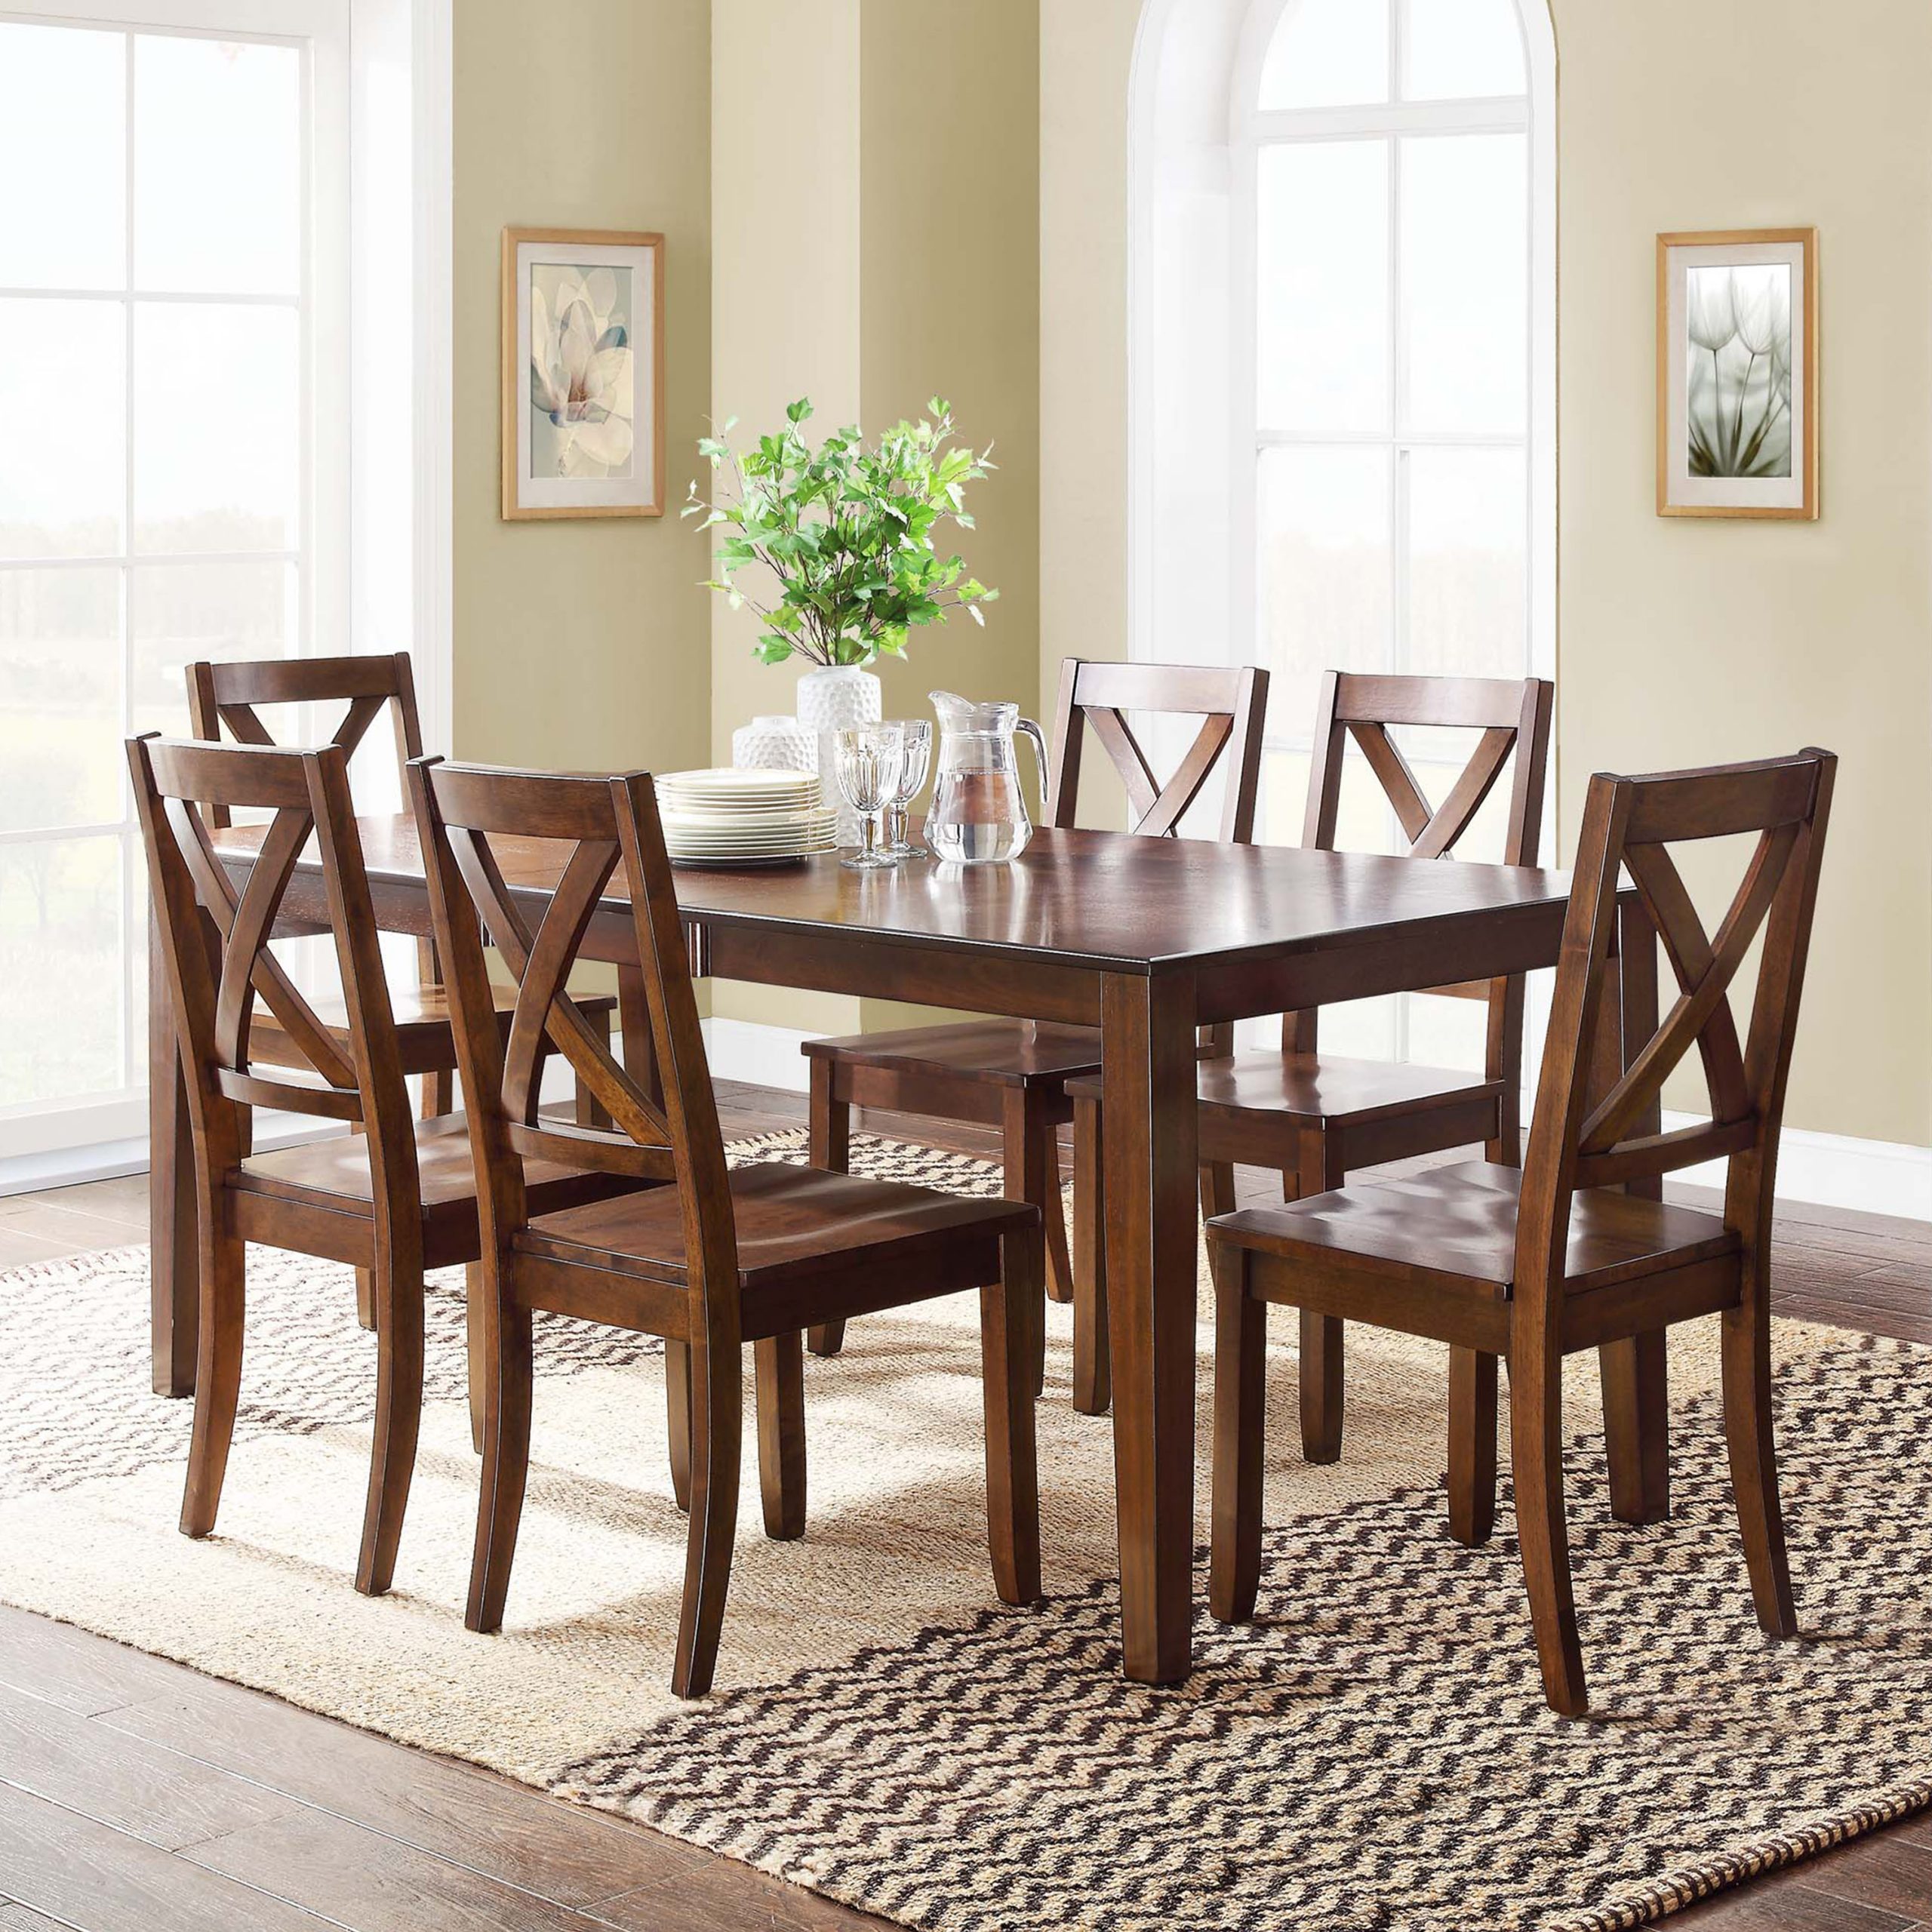 Better homes and gardens maddox crossing dining table with leaf Whalen